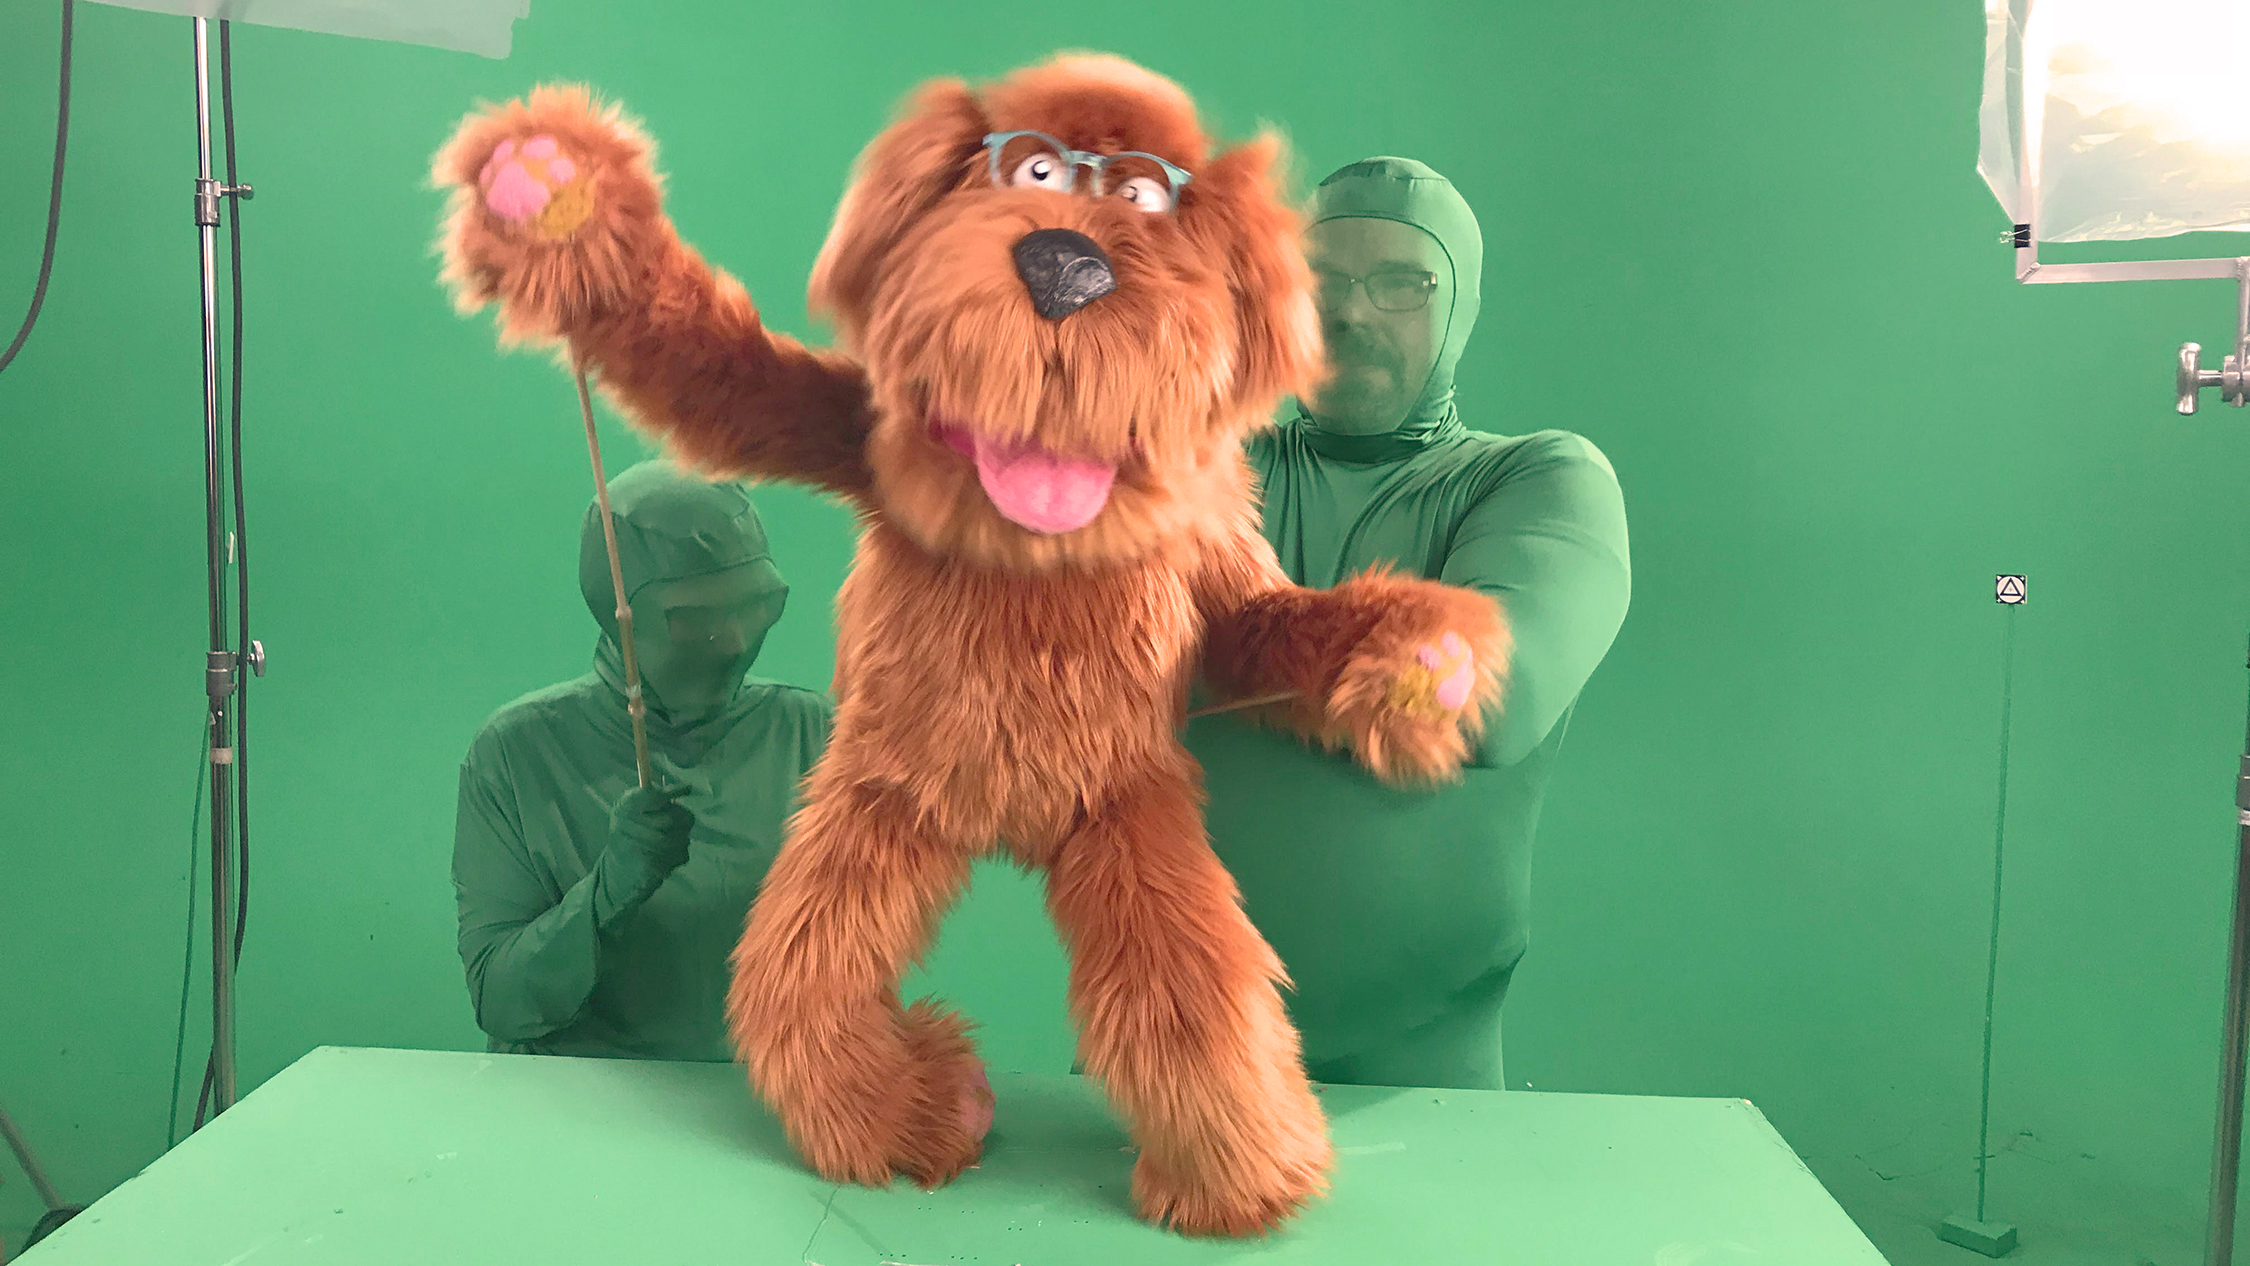 The Fuzzy Dog puppet takes a moment to wave to his fans @ Bent Image Lab, our kanine star from Honda Dream Commute.